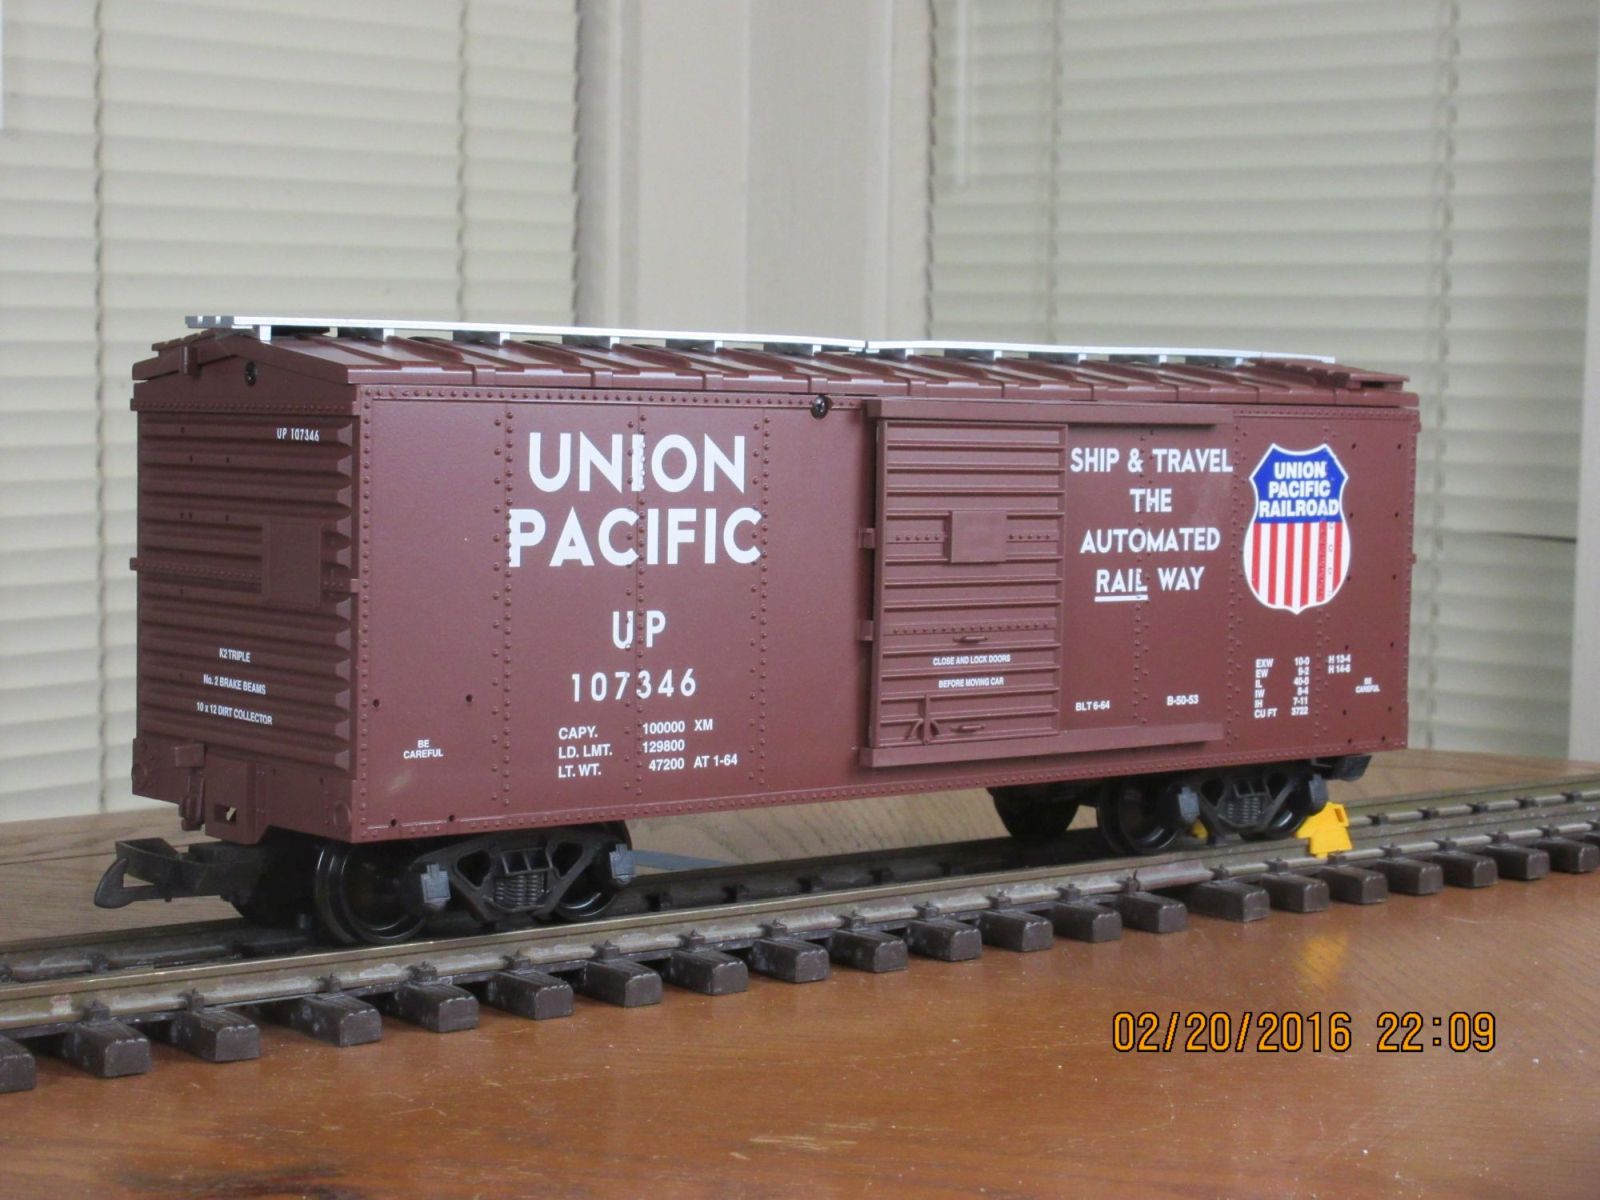 R19105A Union Pacific UP 107346